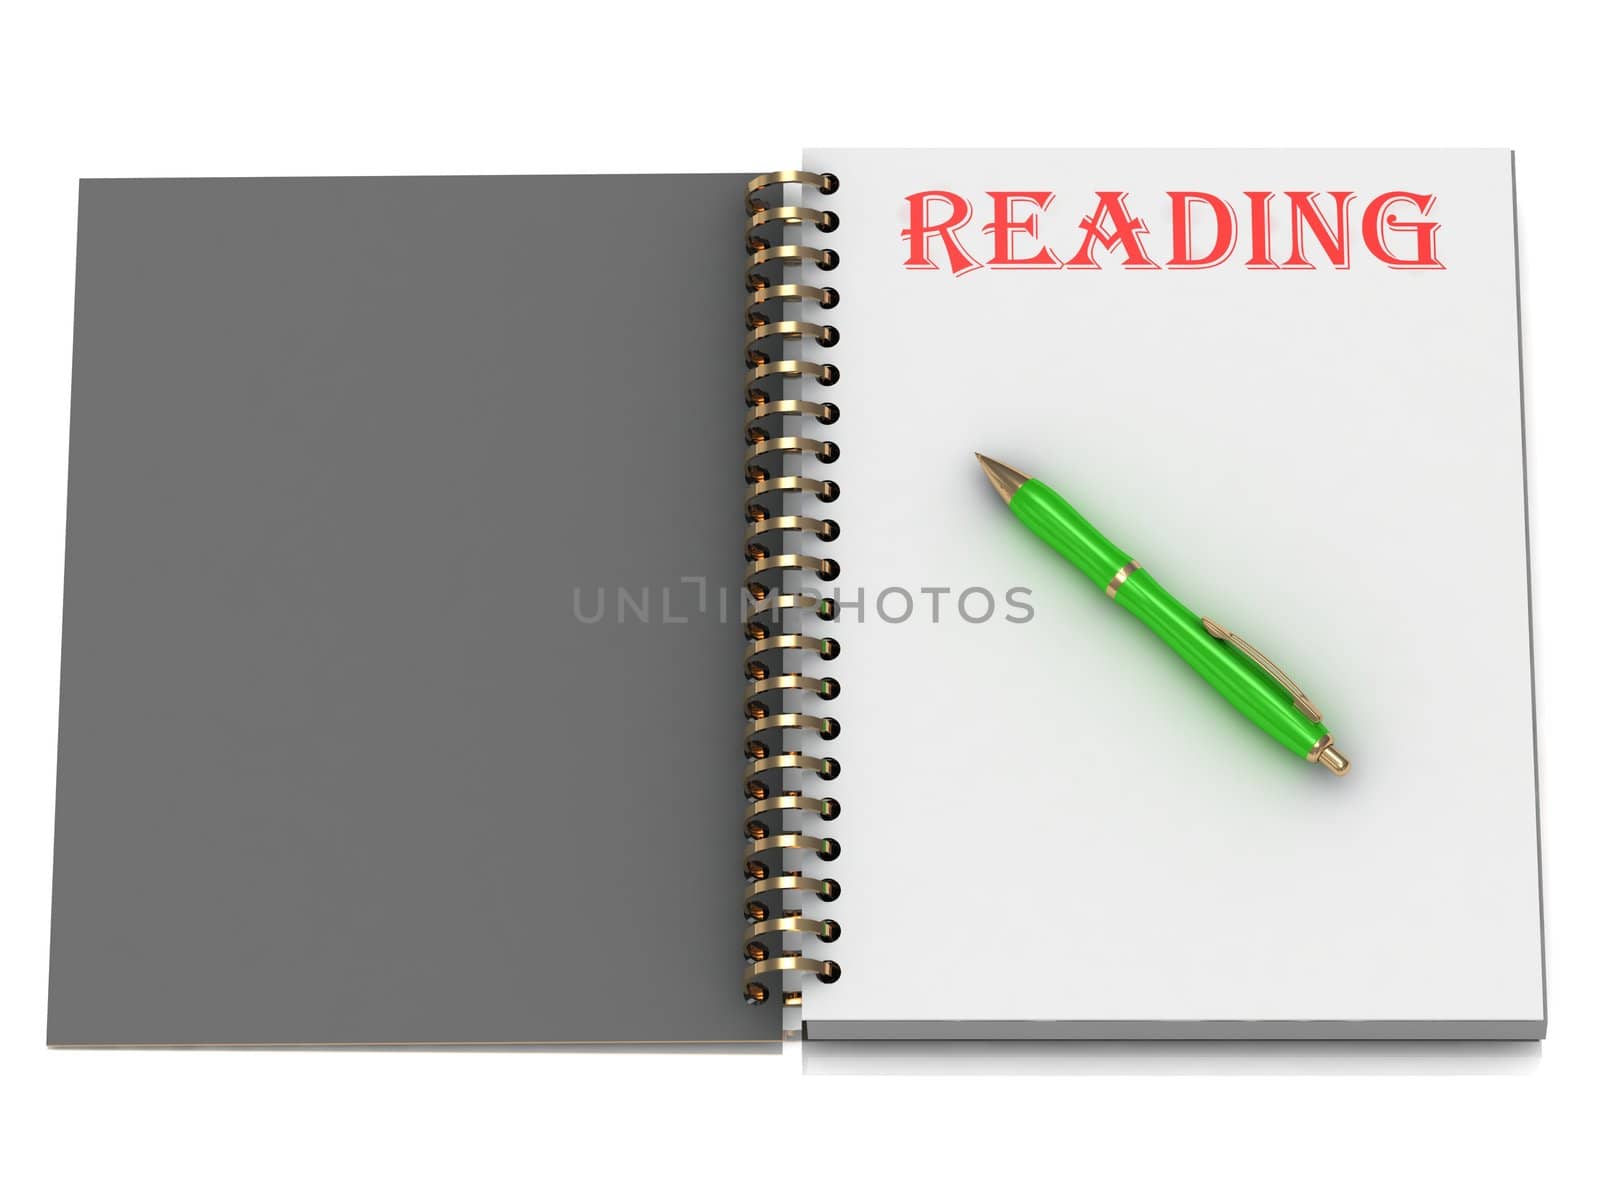 READING inscription on notebook page by GreenMost